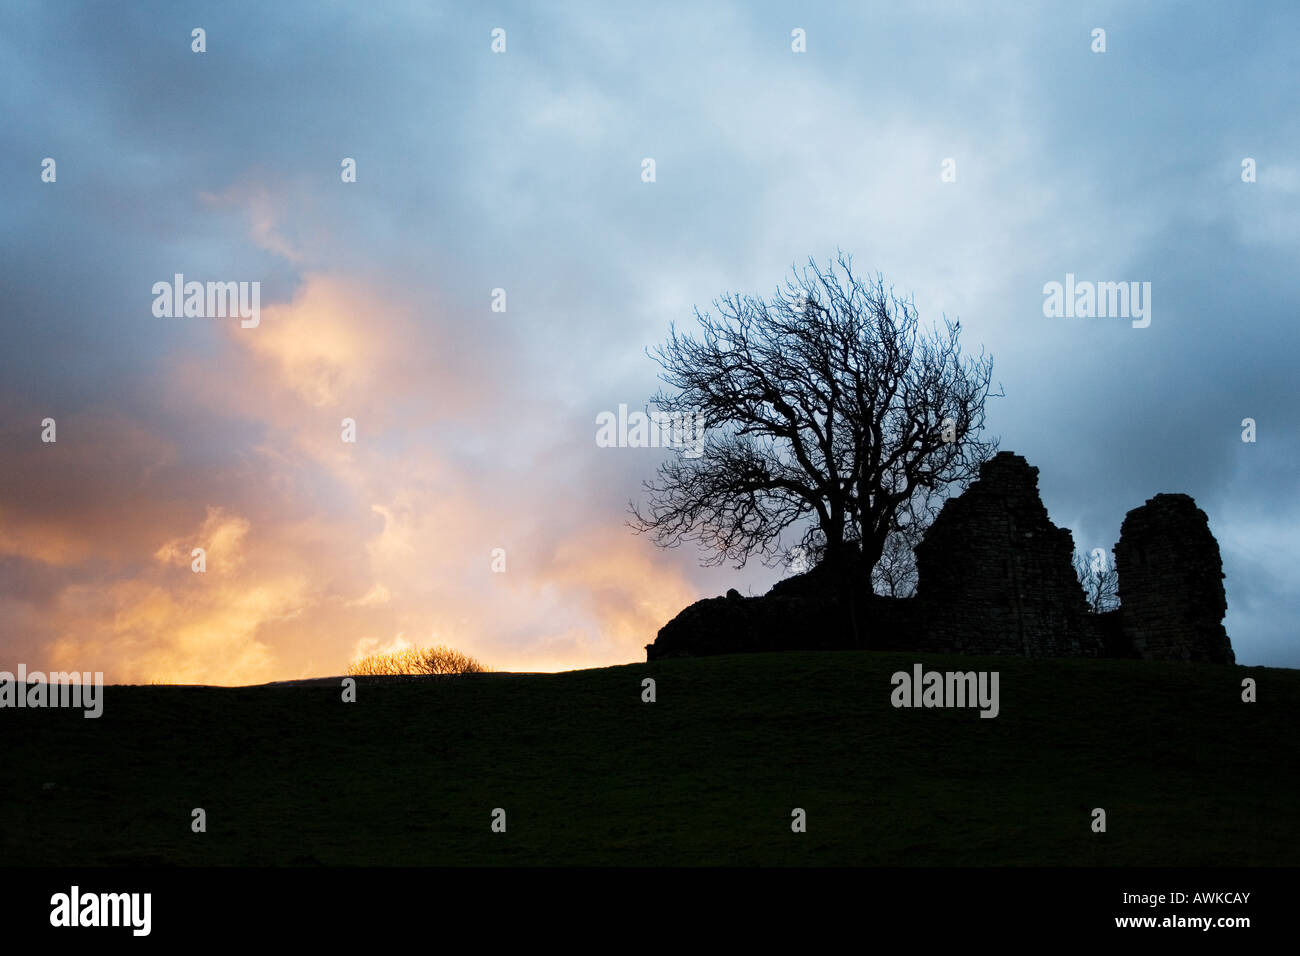 Pendragon castle, Mallerstang dale, silhouette against stormy sunrise sky. Cumbria. UK Stock Photo